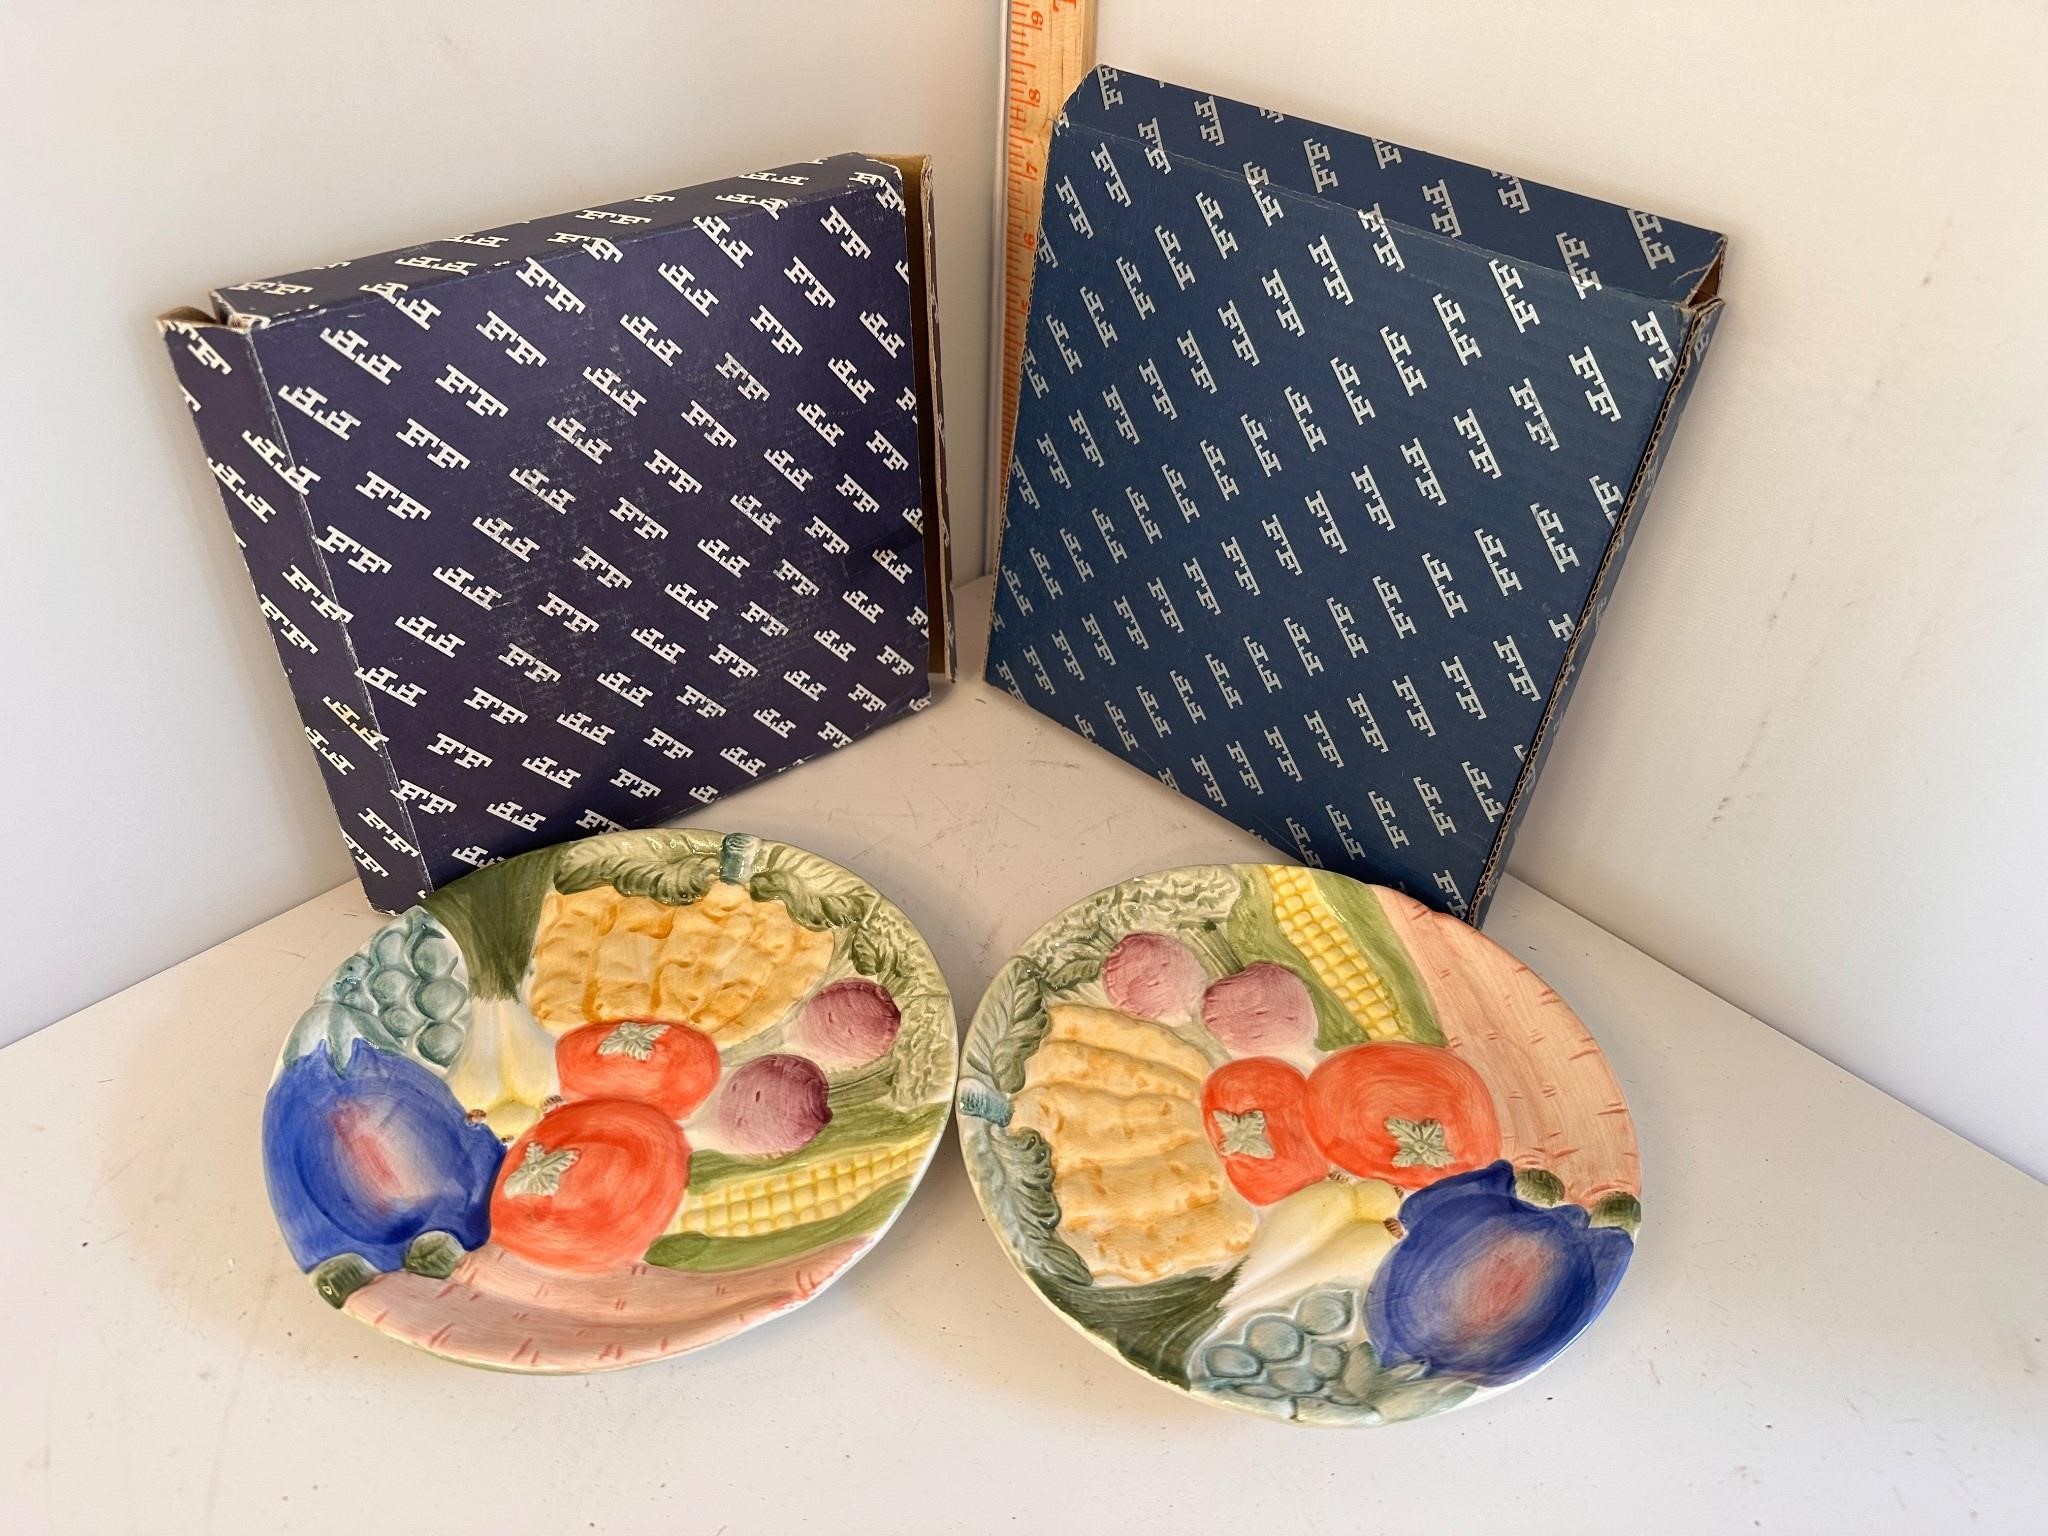 2 Fitz and Floyd small vegetable plates